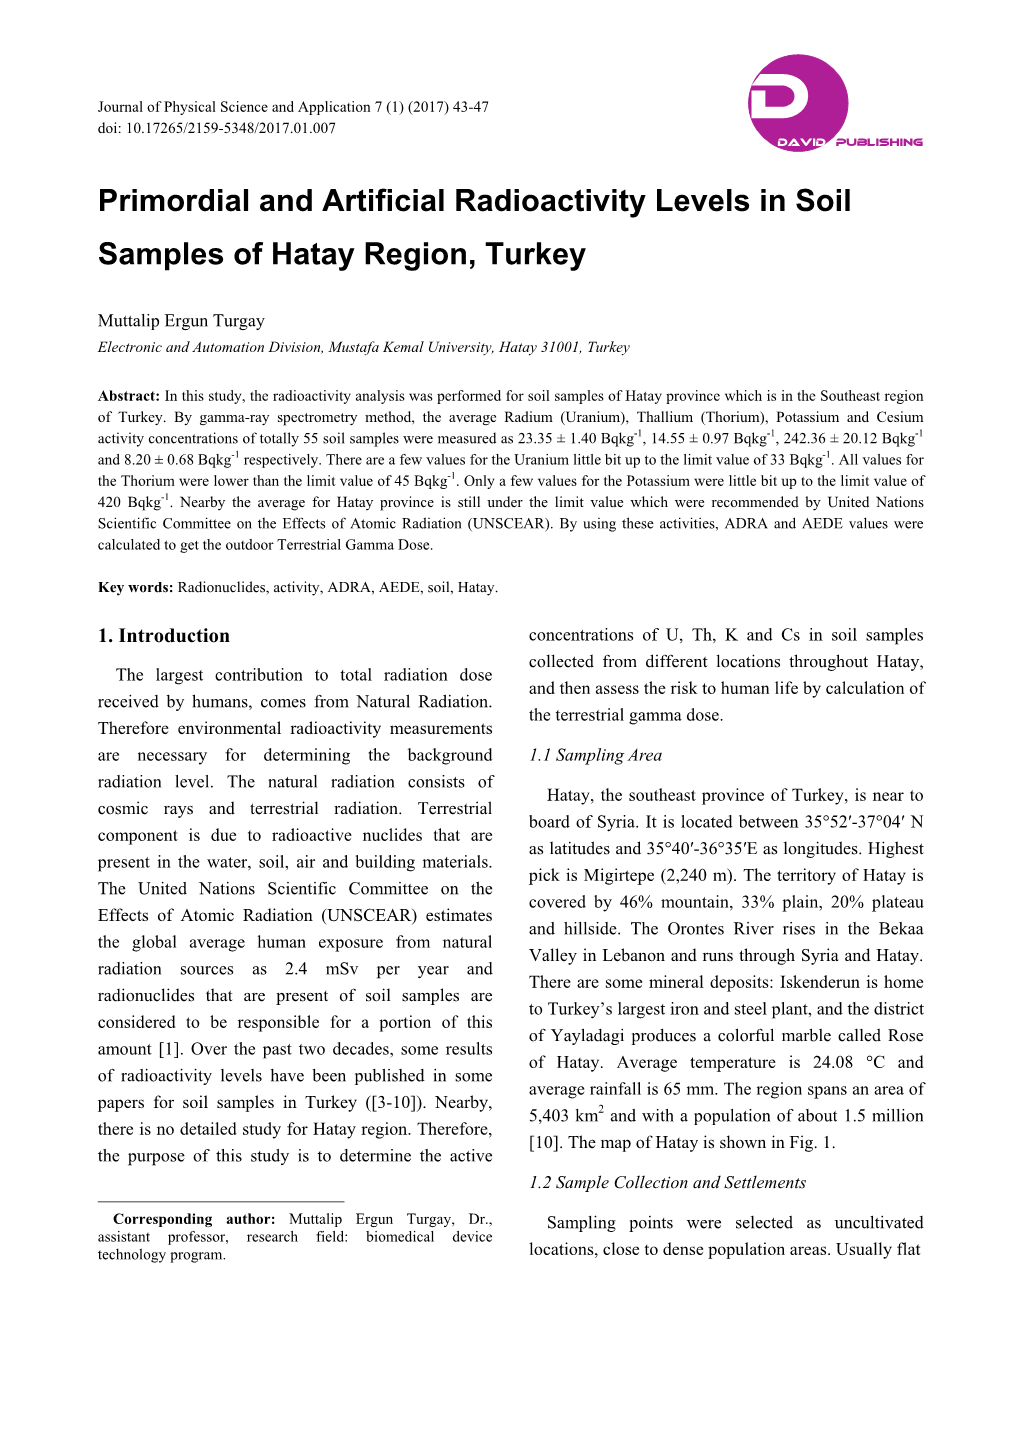 Primordial and Artificial Radioactivity Levels in Soil Samples of Hatay Region, Turkey